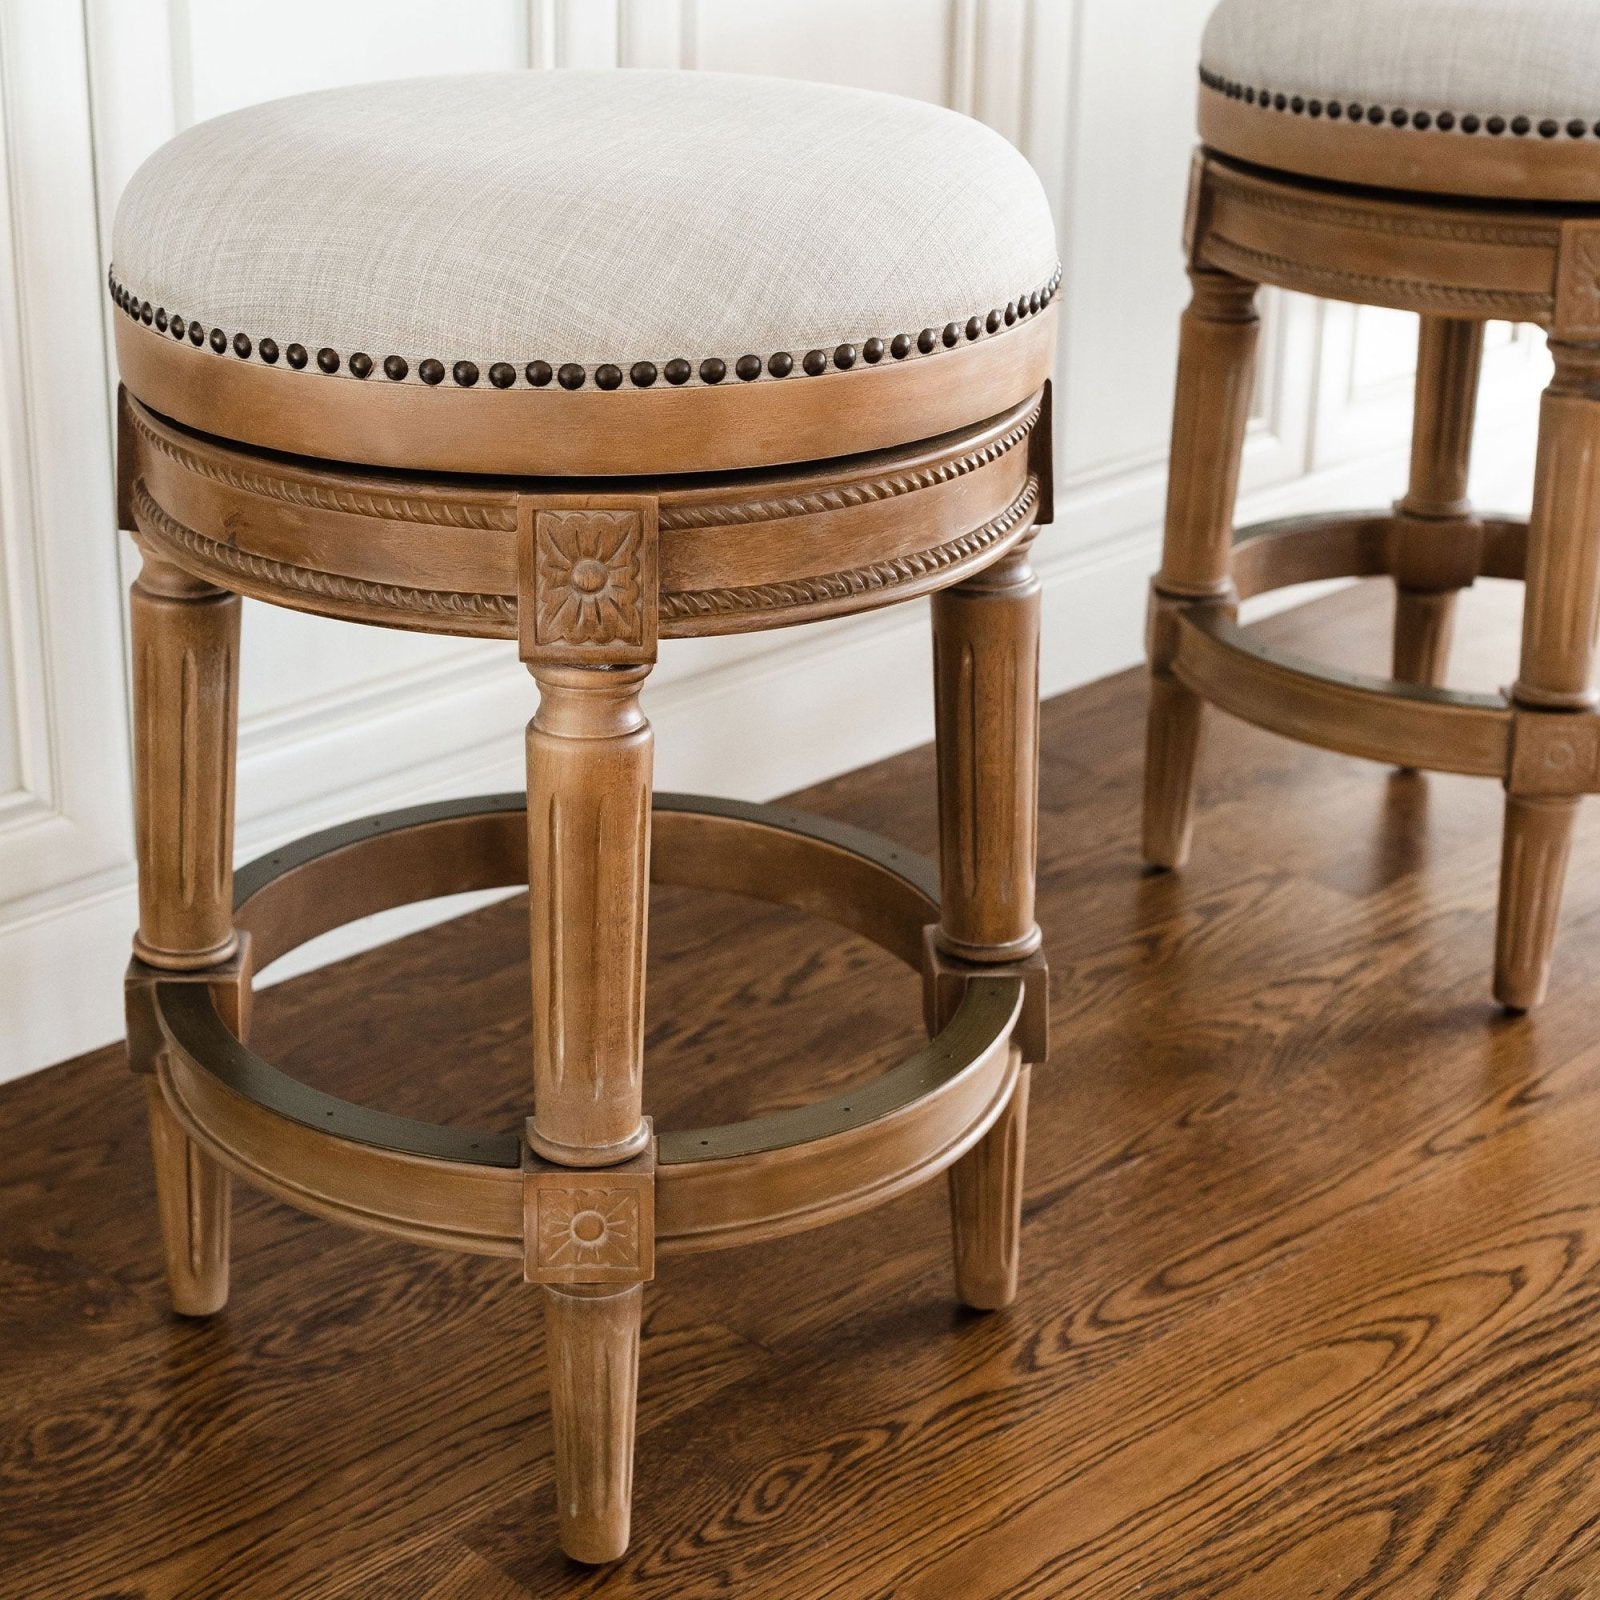 Pullman Backless Counter Stool in Weathered Oak Finish with Sand Color Fabric Upholstery in Stools by Maven Lane